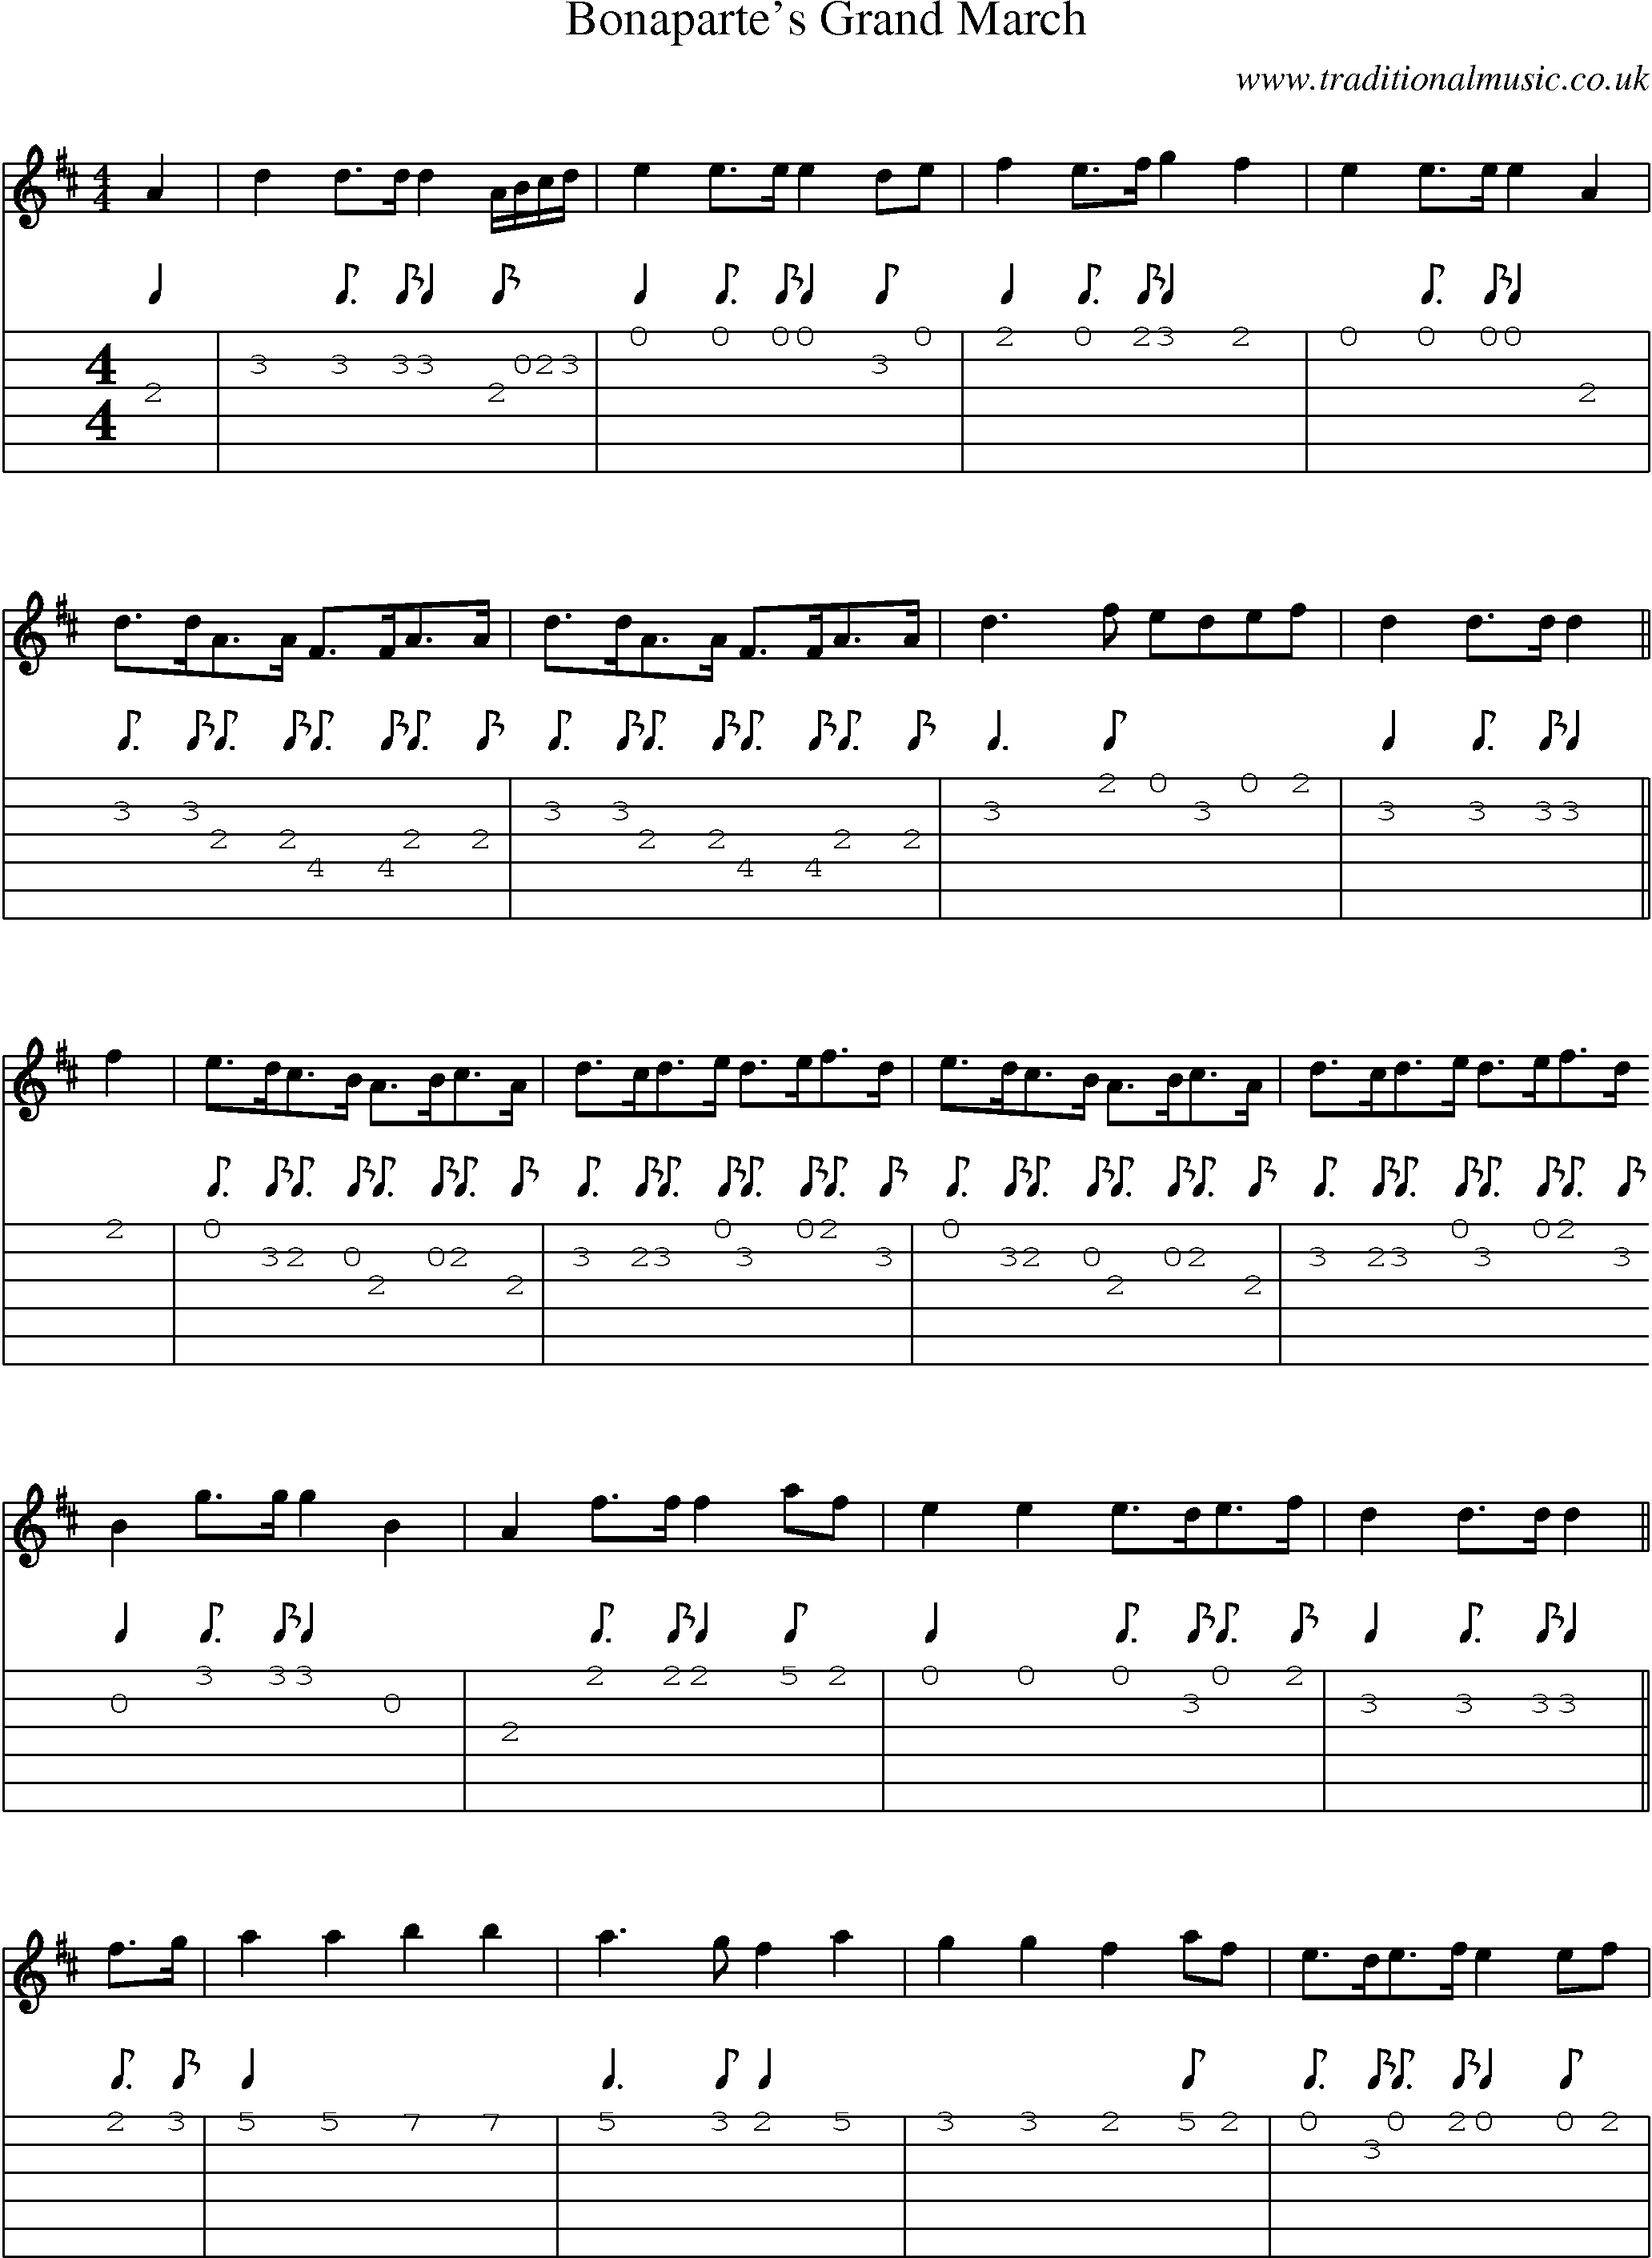 Music Score and Guitar Tabs for Bonapartes Grand March